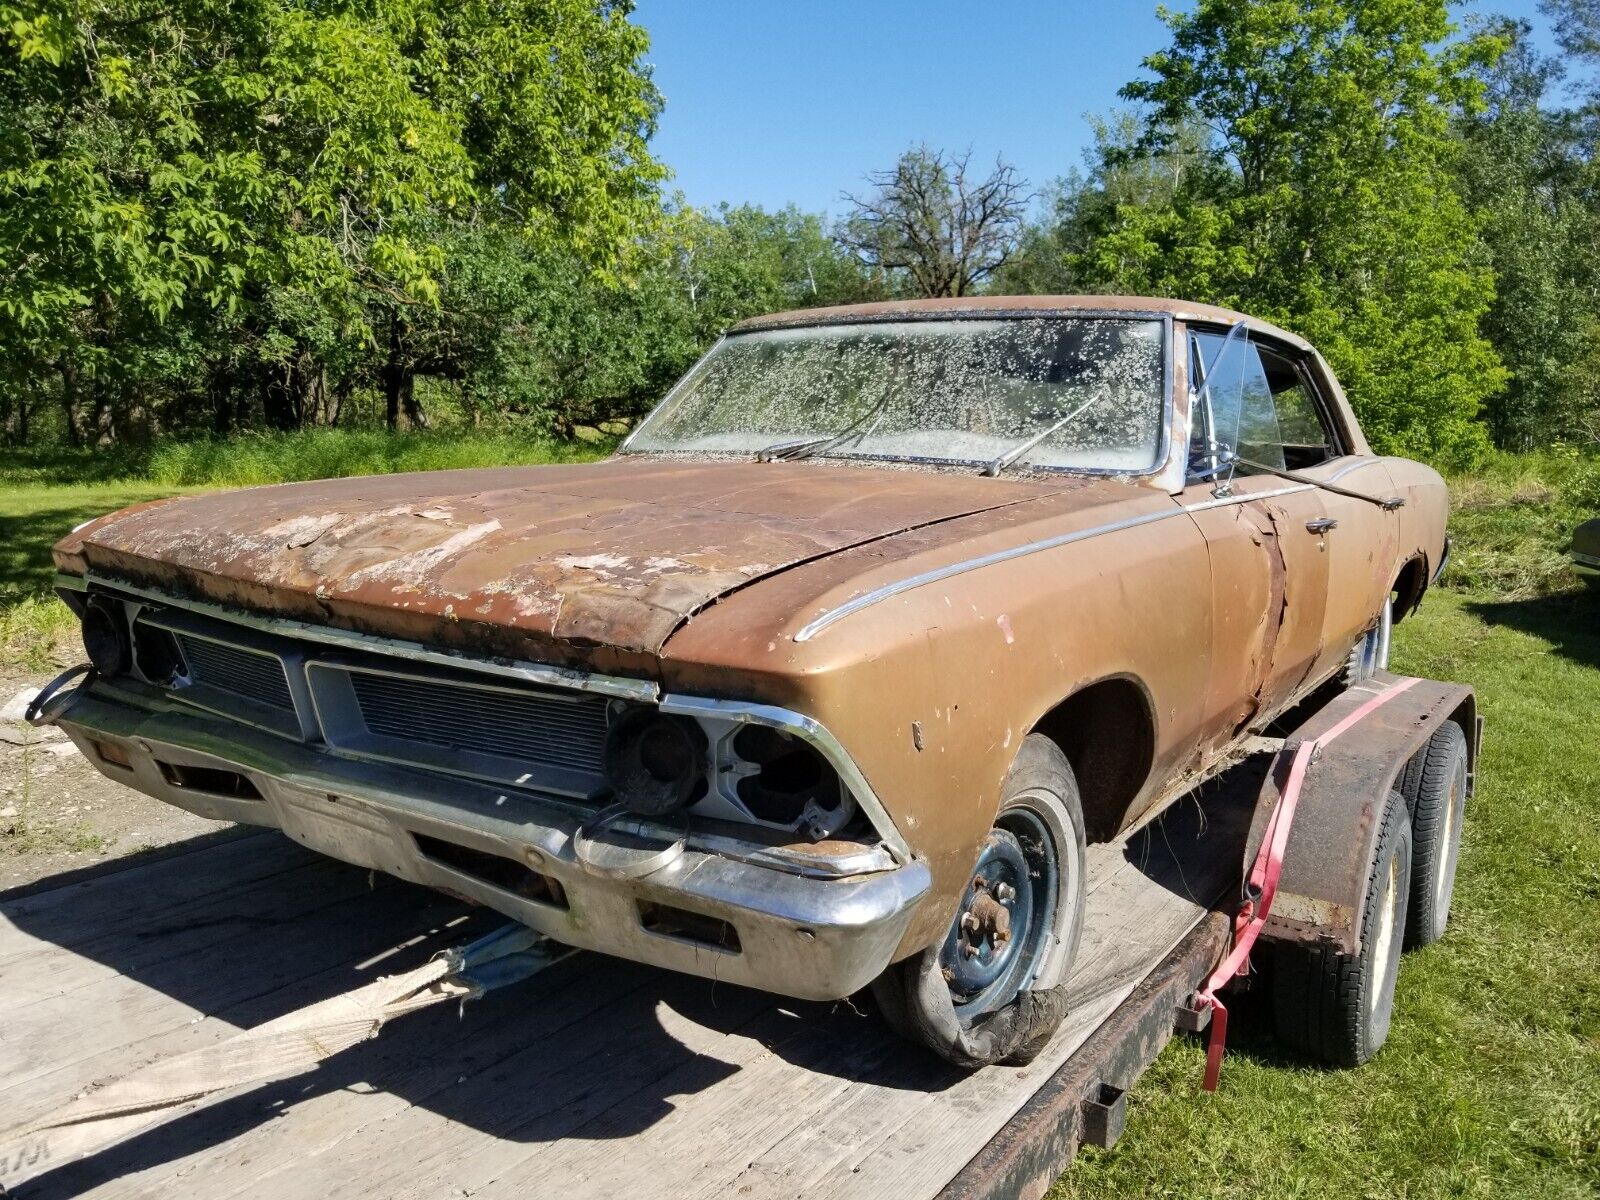 1966 Pontiac Beaumont 4dr HT 283 V8 Auto PARTING OUT-this auction is for 1 WHEEL